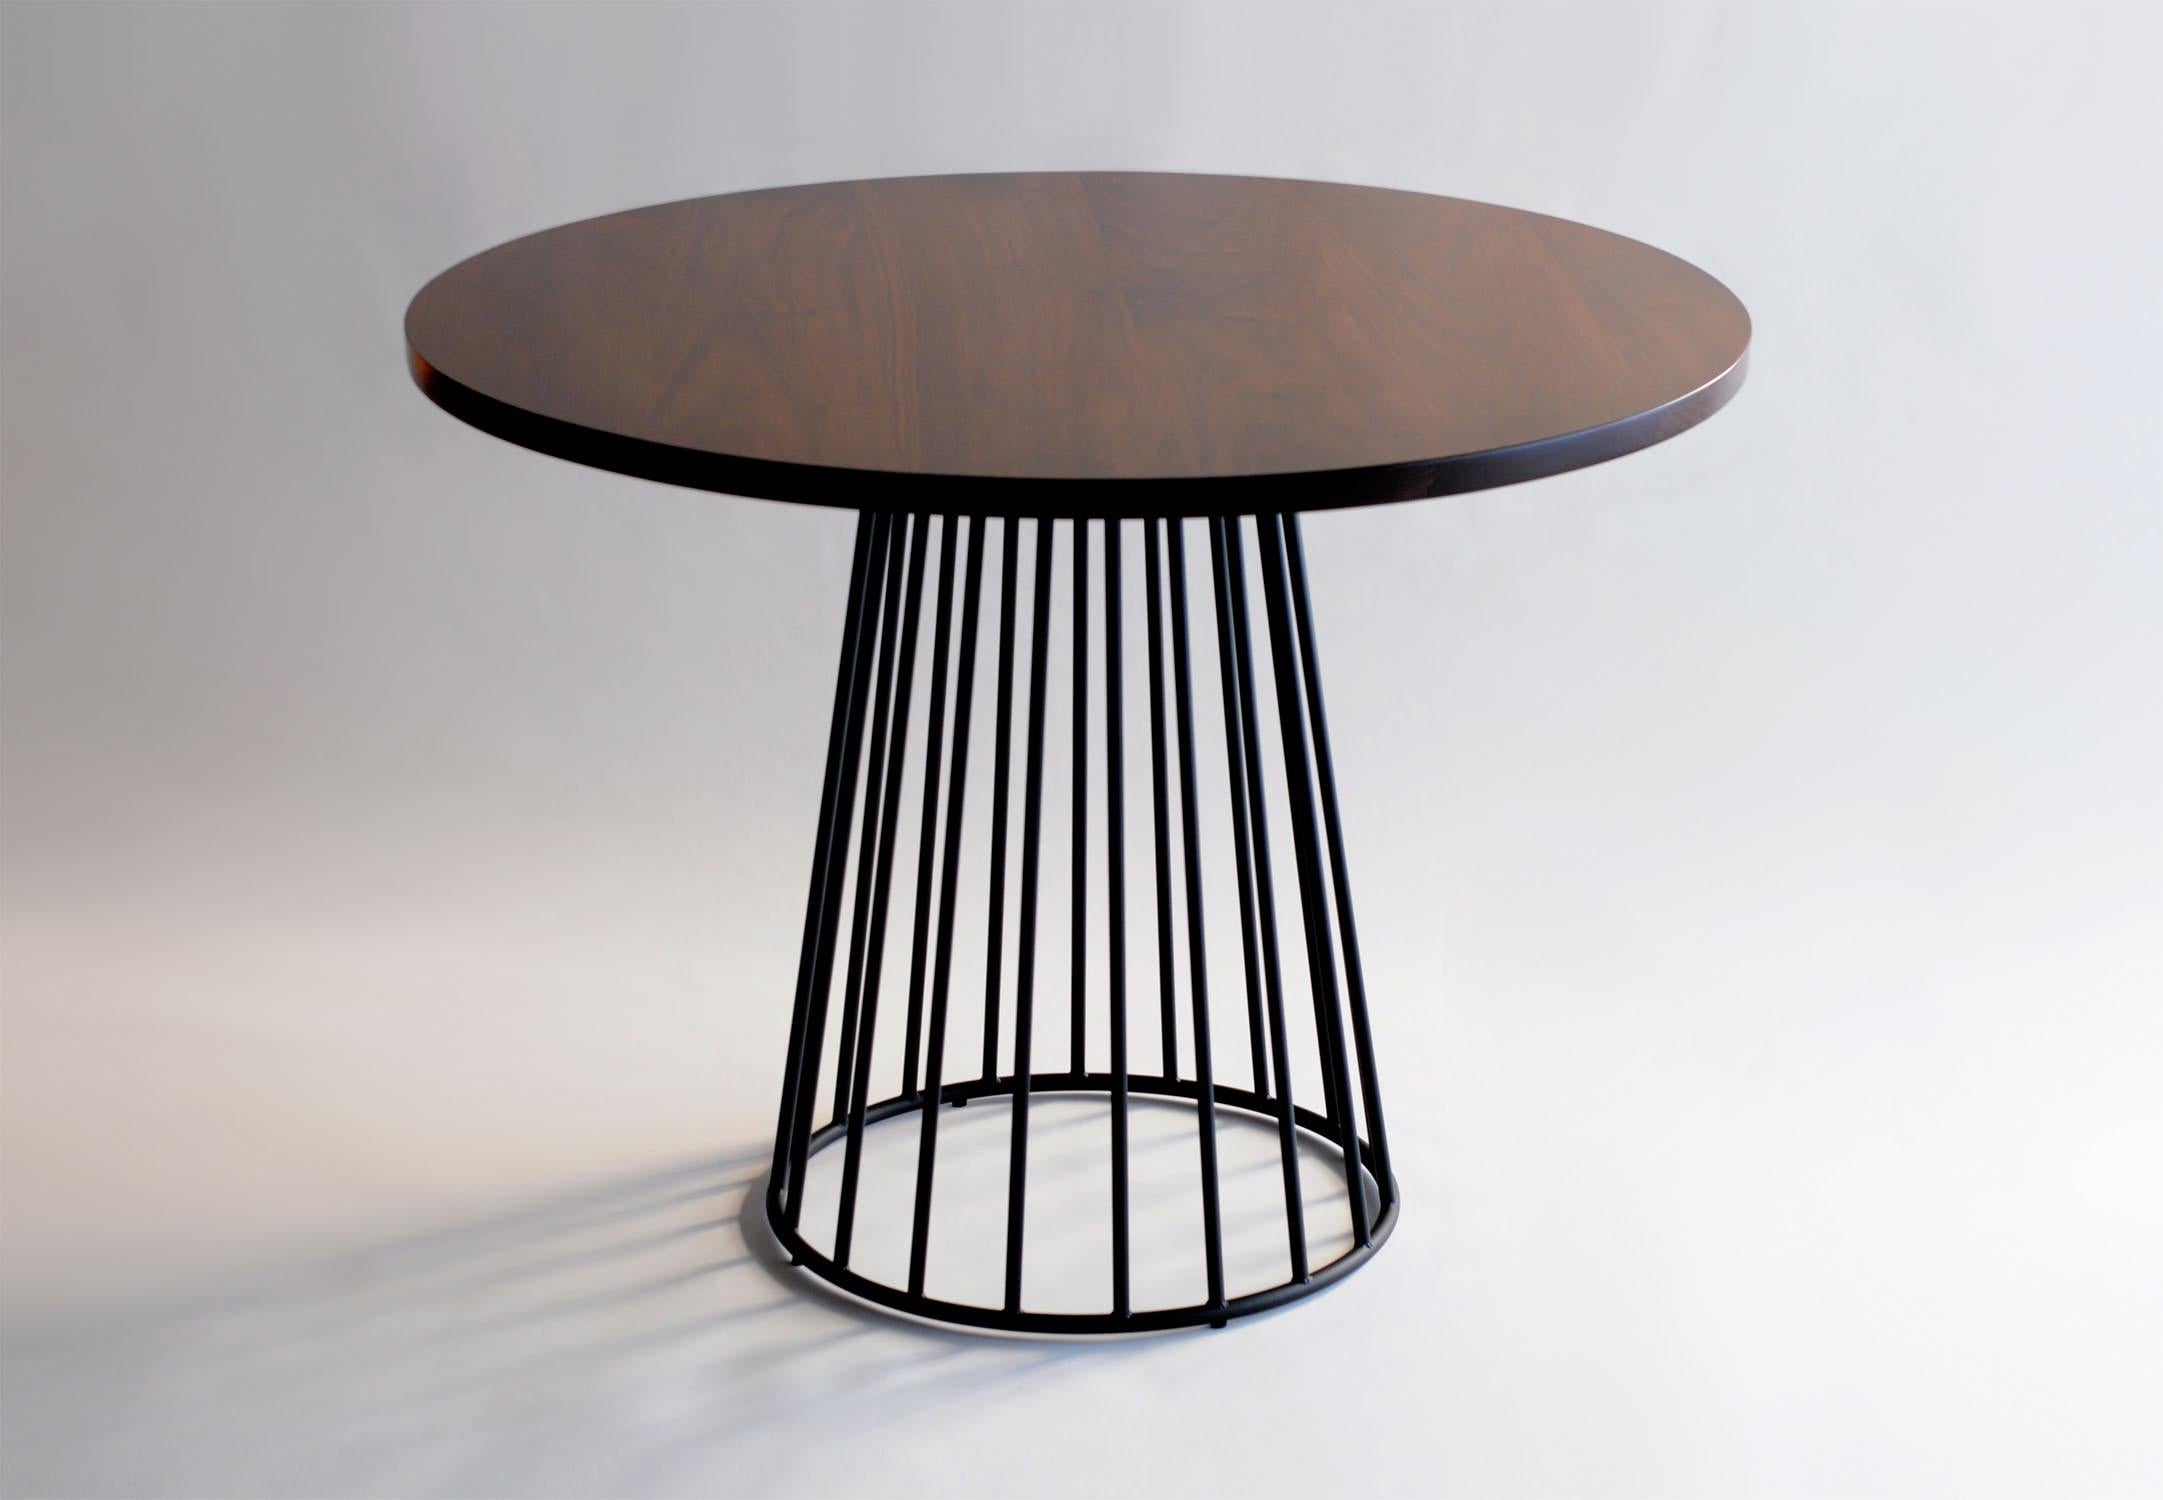 Wired Cafe Table by Phase Design, Polished Chrome In New Condition For Sale In North Hollywood, CA